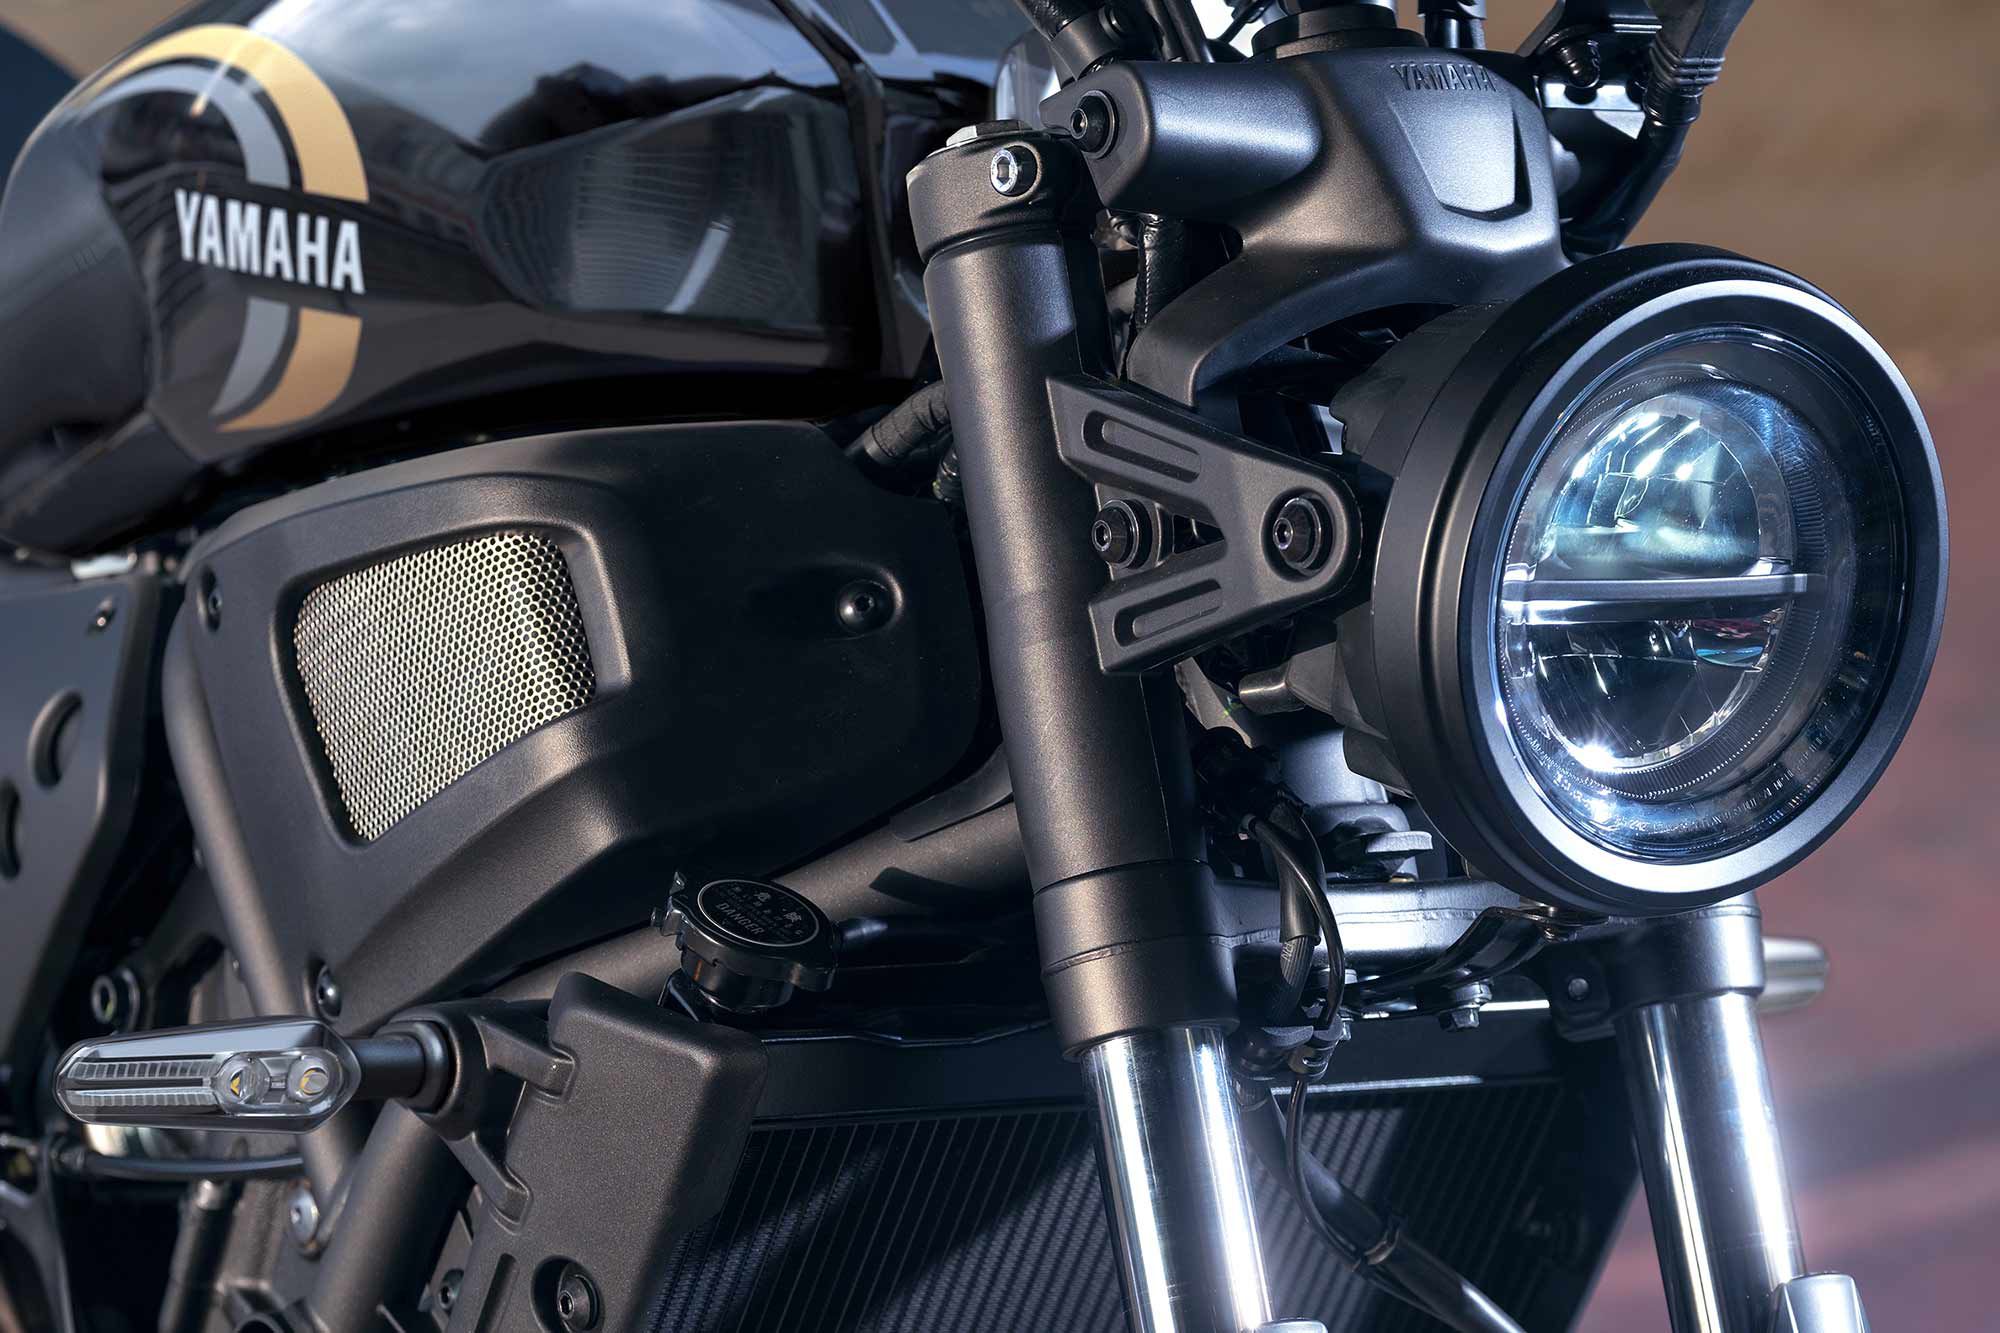 The LED headlight was mounted in a revised position to tidy-up the look of the front end.